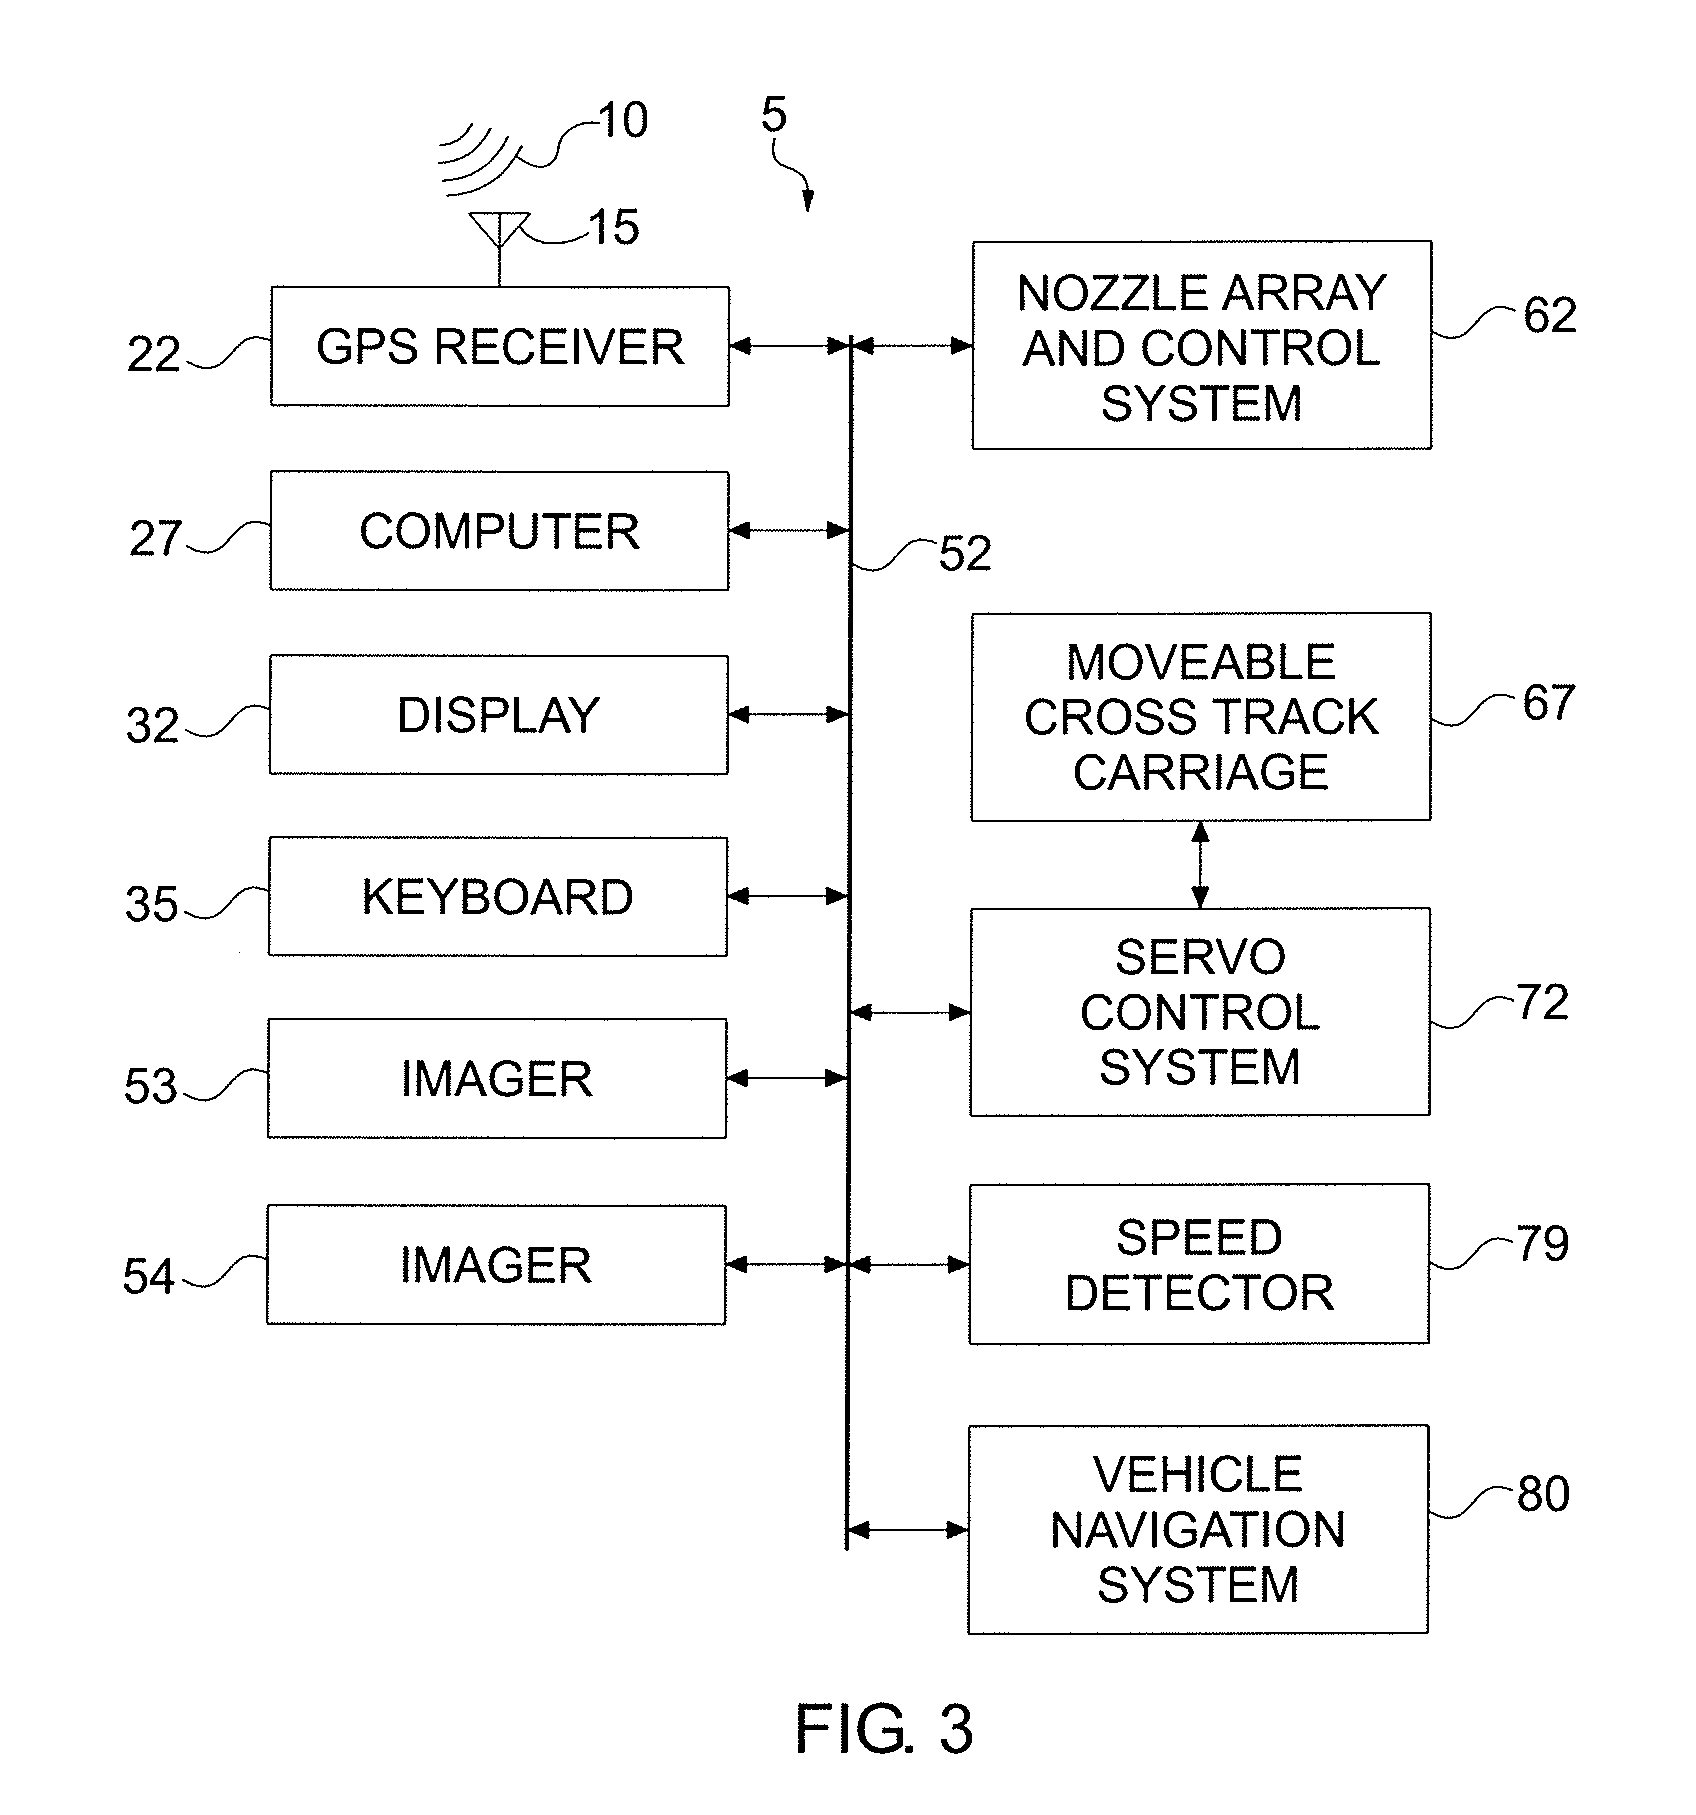 Roadway mark data acquisition and analysis apparatus, systems, and methods